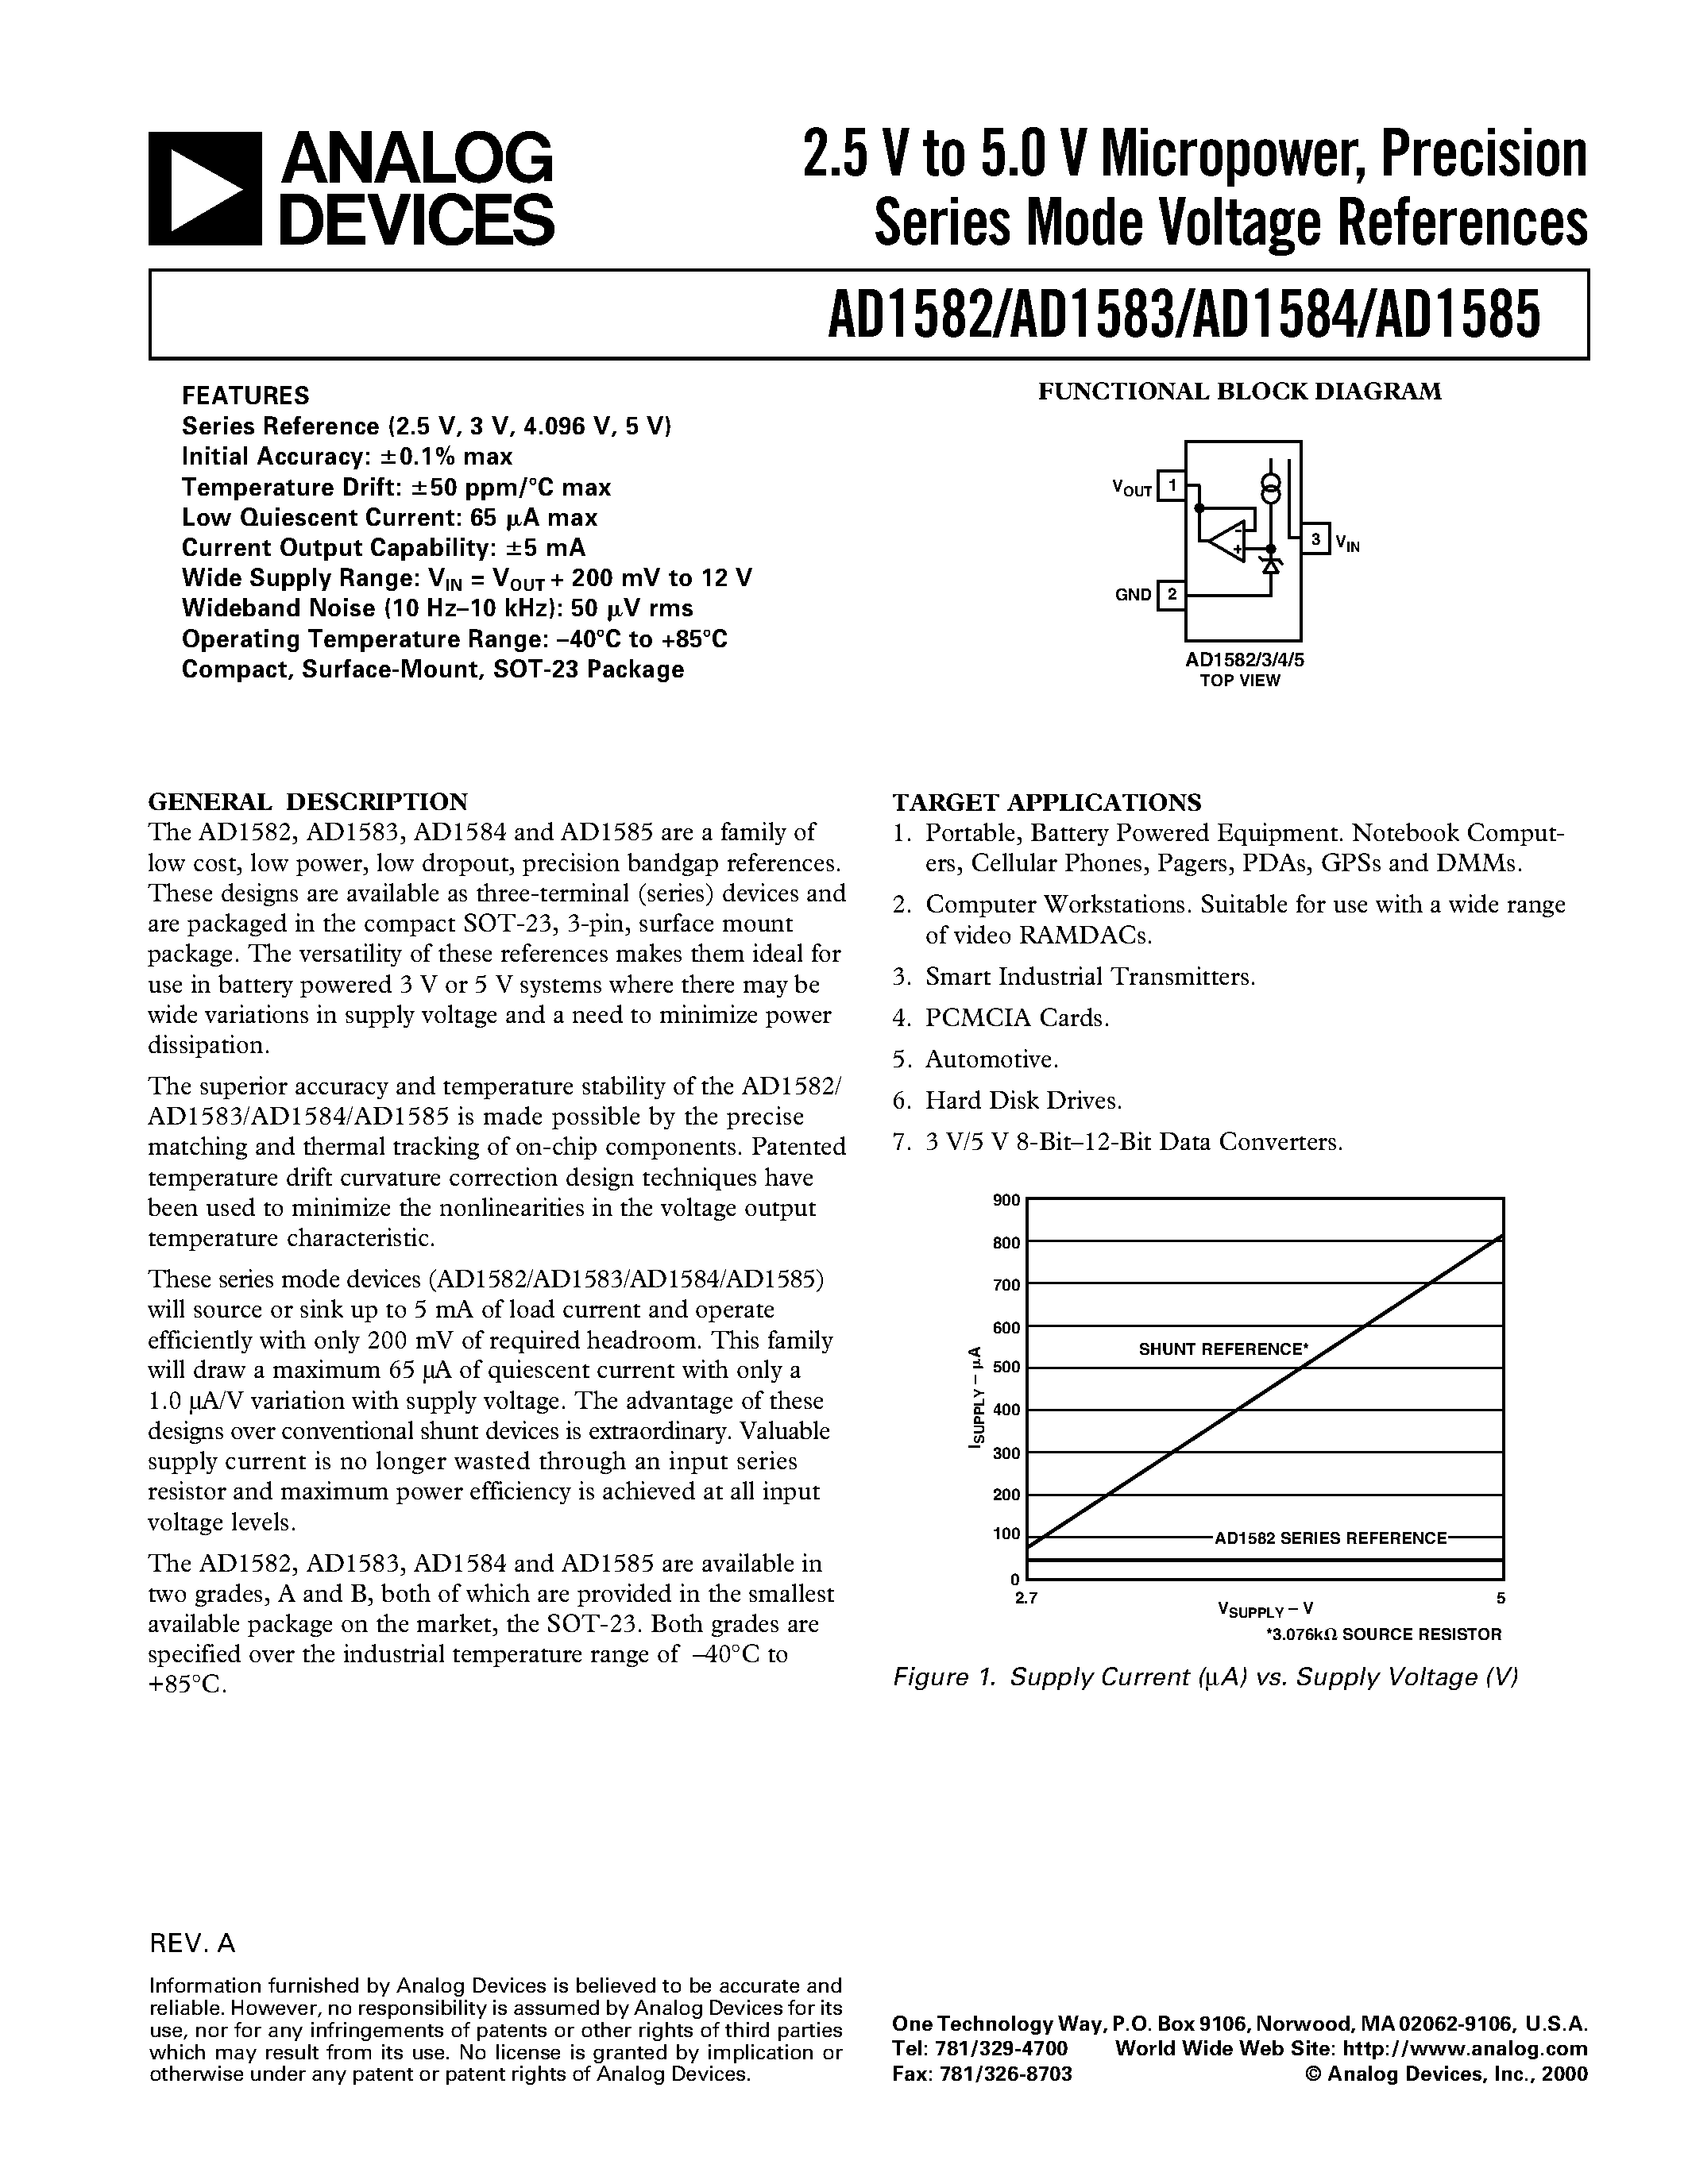 Даташит AD1585BRT - 2.5 V to 5.0 V Micropower/ Precision Series Mode Voltage References страница 1